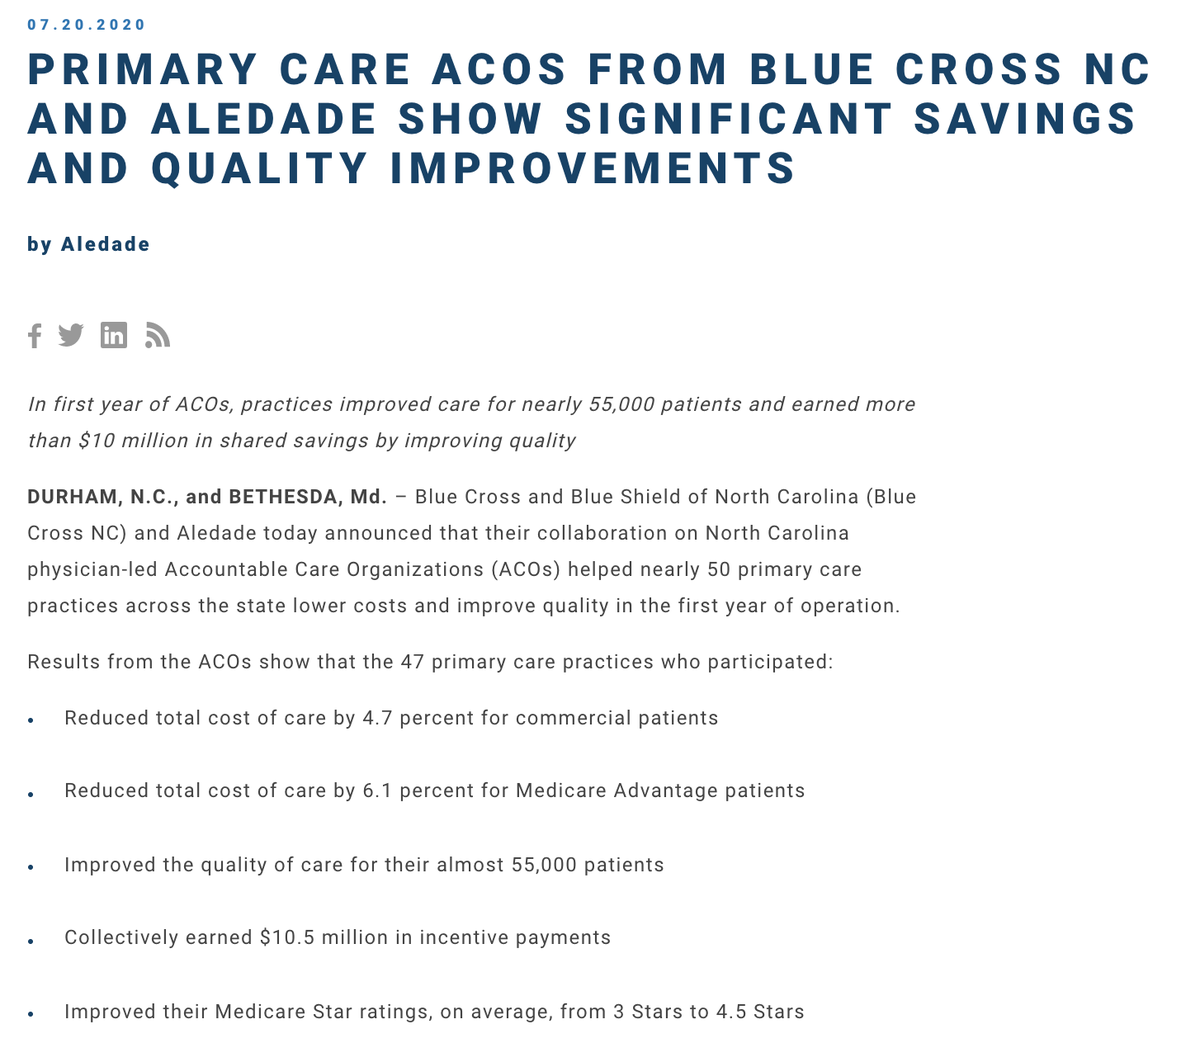 12/ In our first year, these practices reduced costs by 5% for commercial patients and 6% for MASo while COVID is decimating FFS revenues, these 47 independent primary care practices earned a payout of more than $10,000,000- for keeping patients healthy and out of the hospital